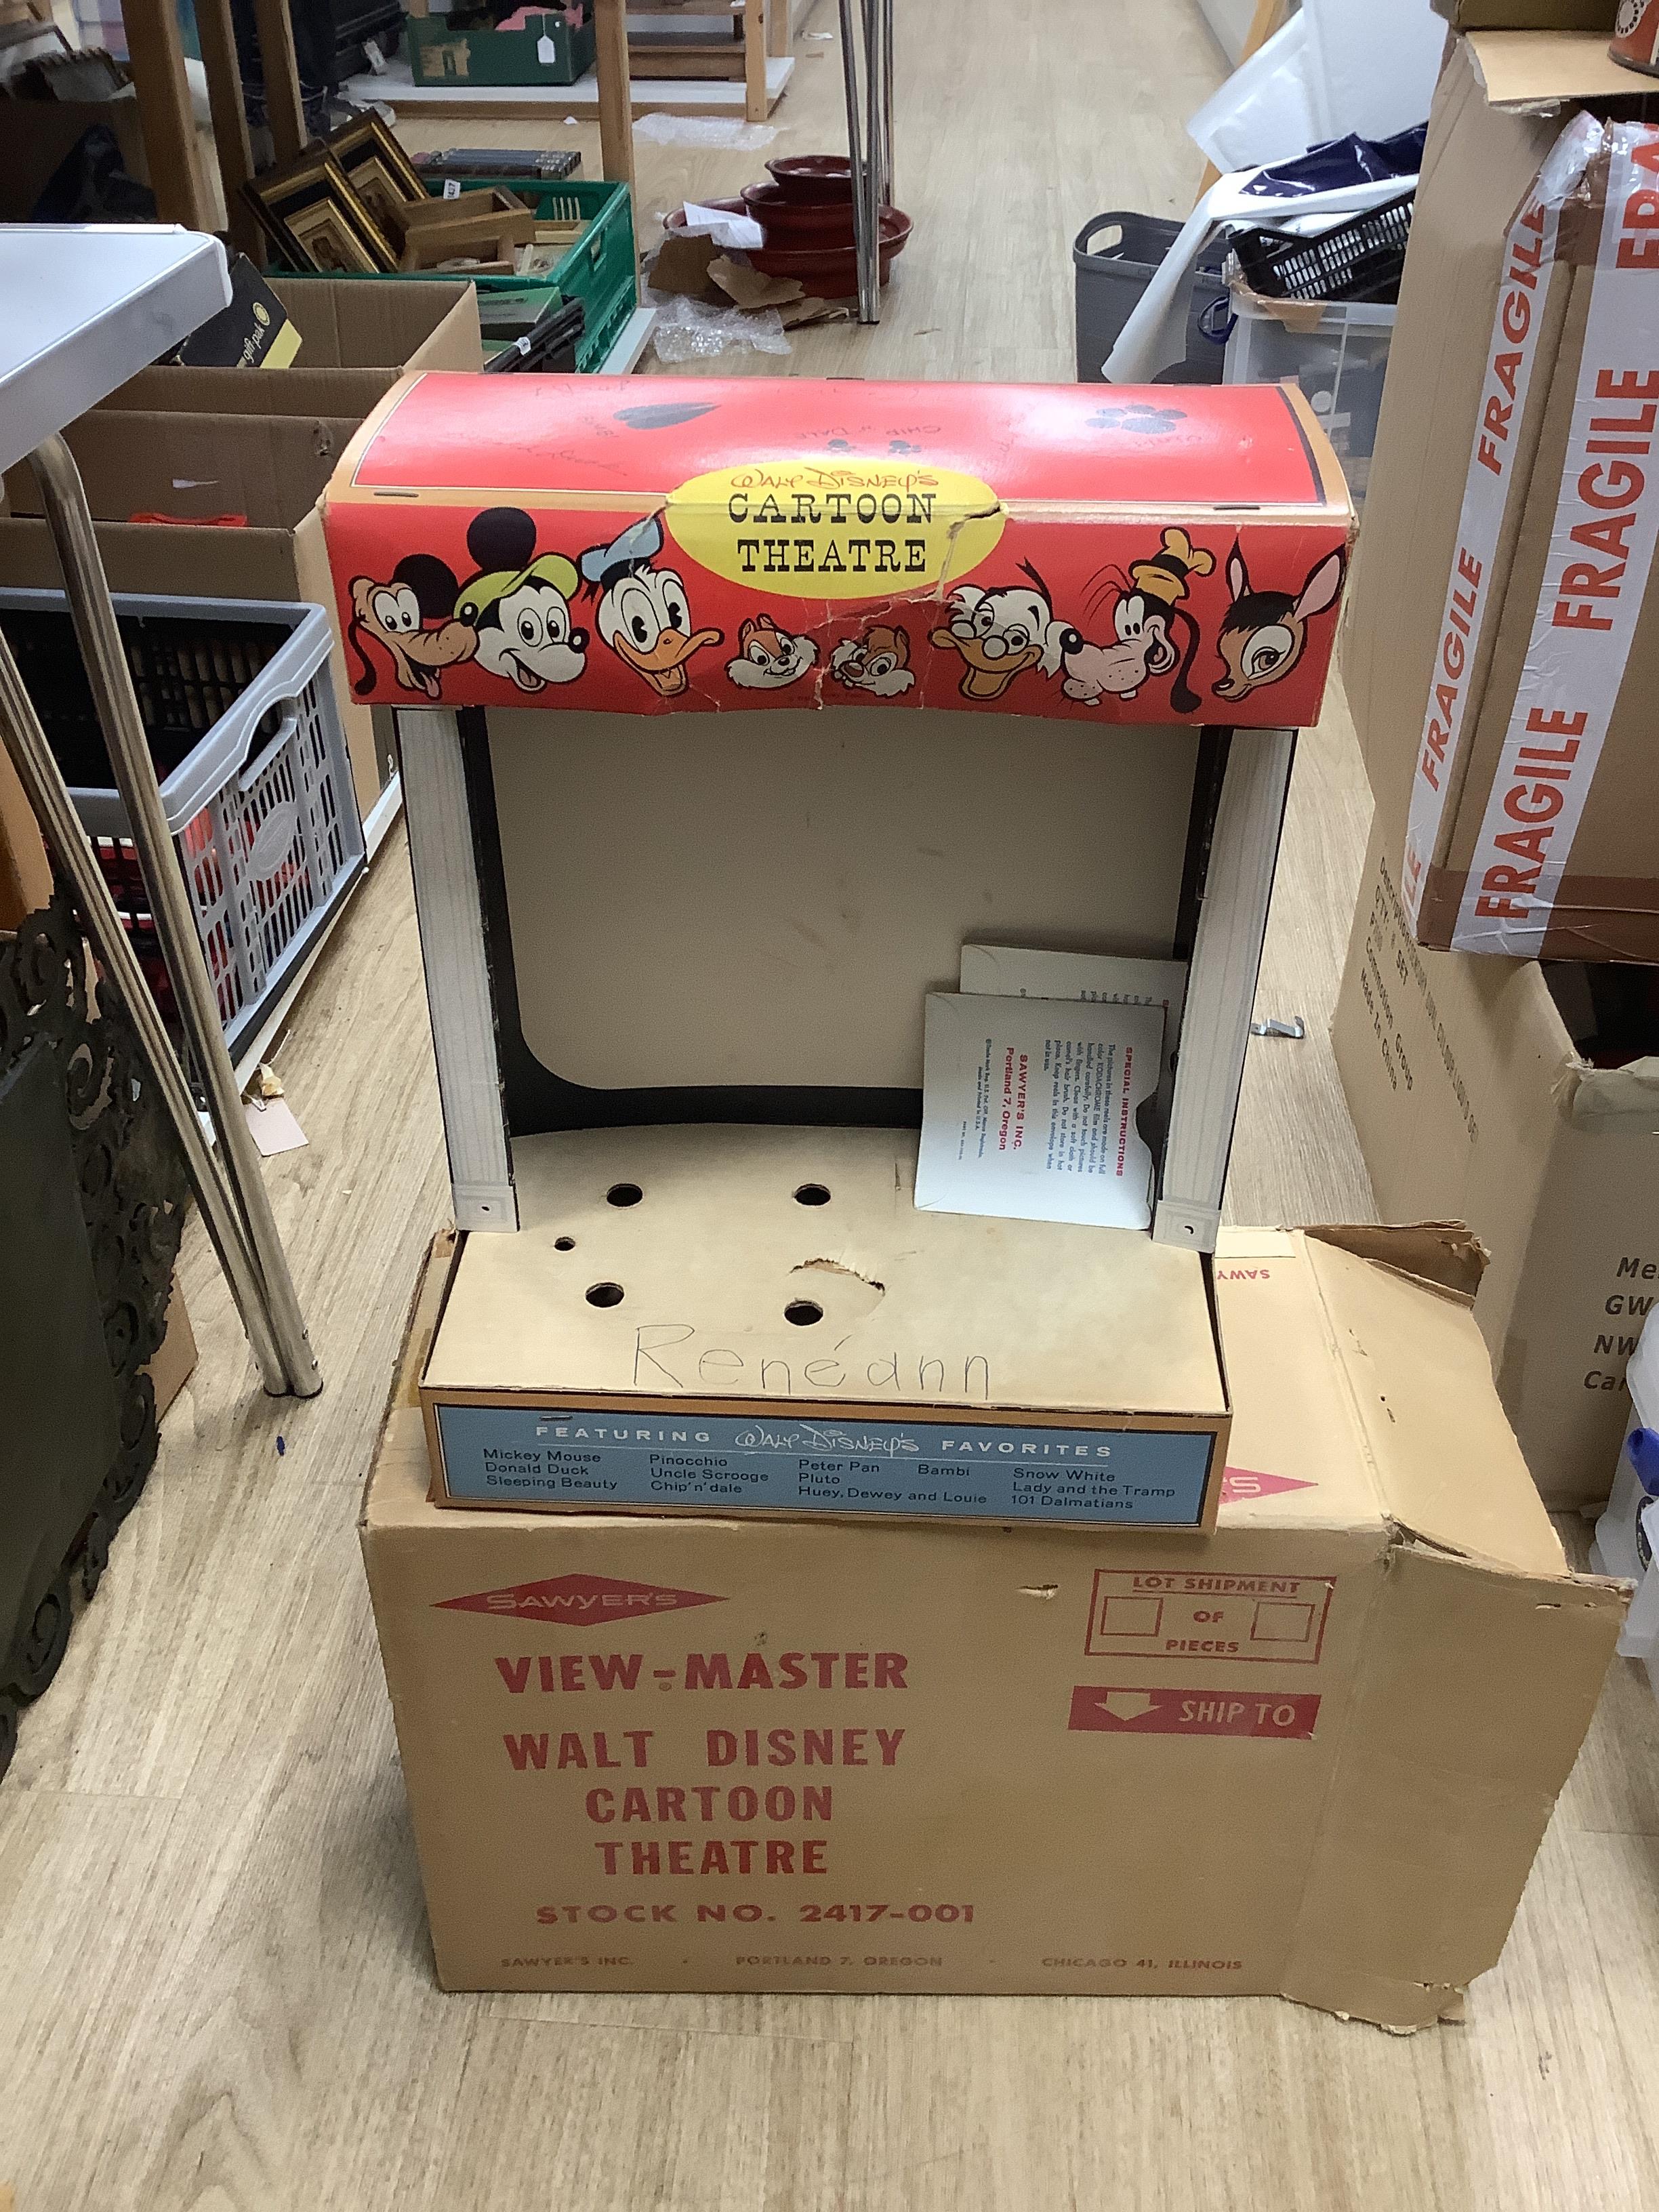 Sawyer’s View-Master empty boxes and a scarce printed card Walt Disney Cartoon Theatre, with original shipping box